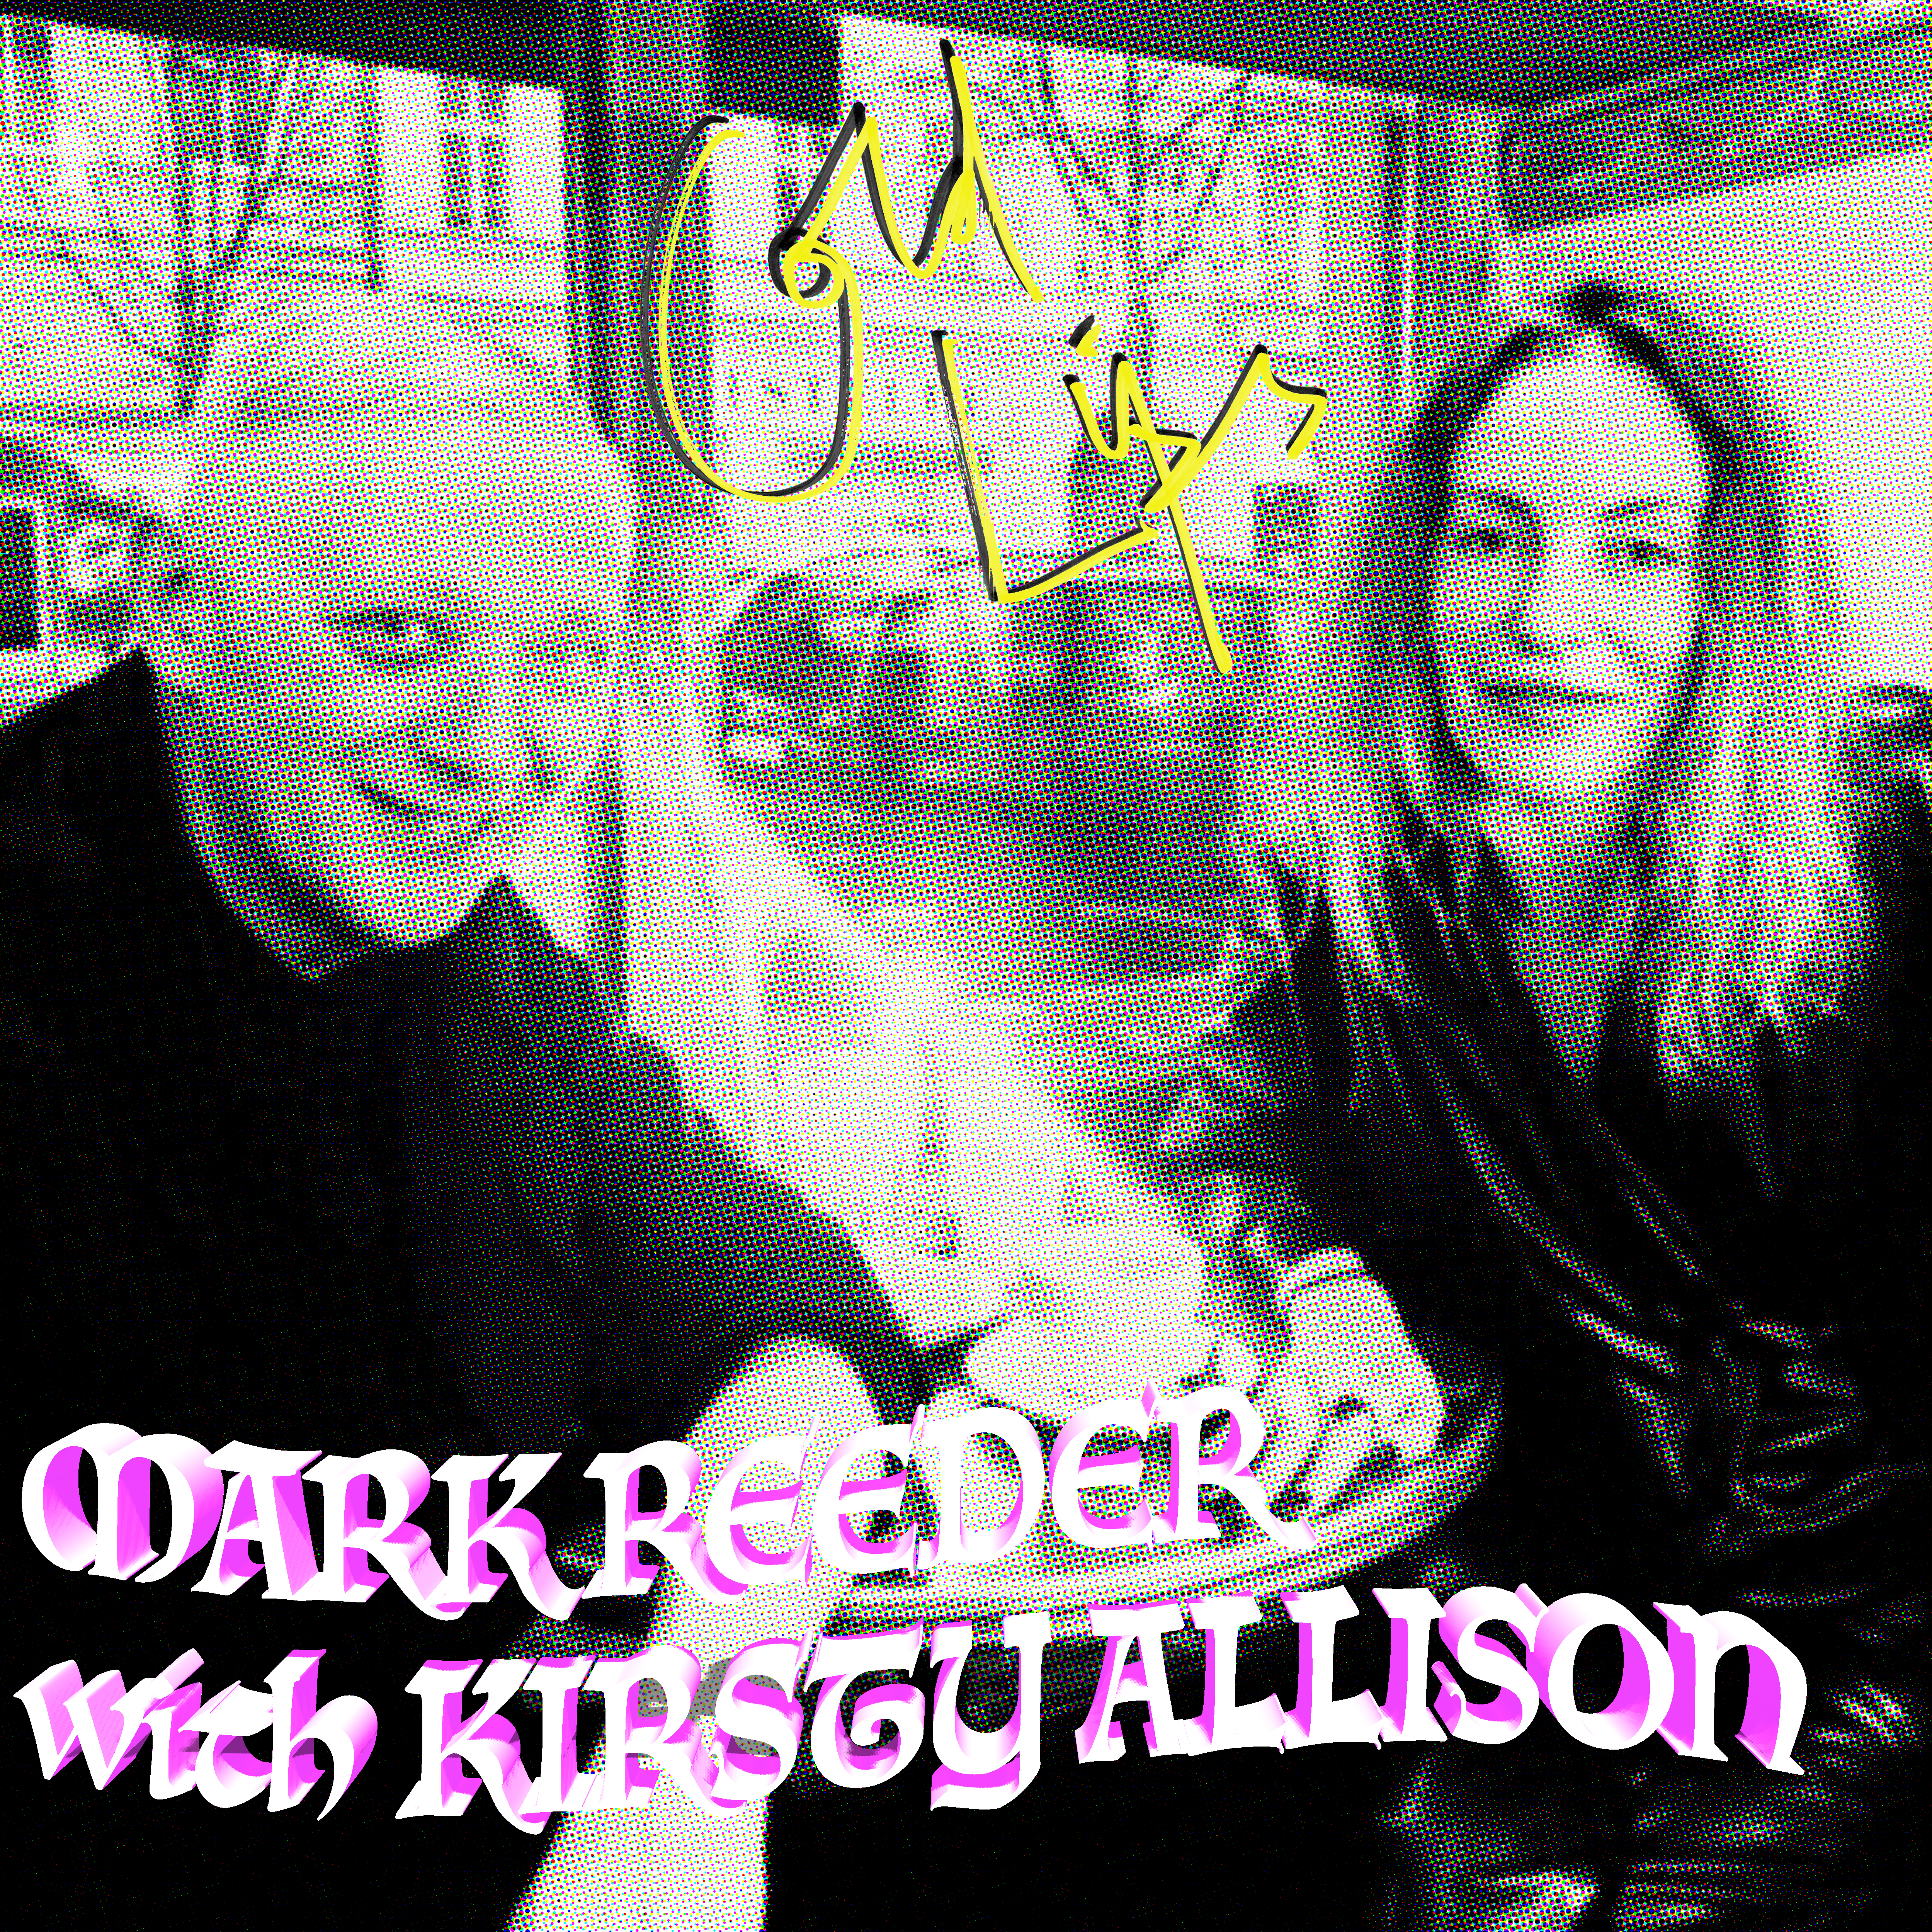 Mark Reeder podcast with Kirsty Allison